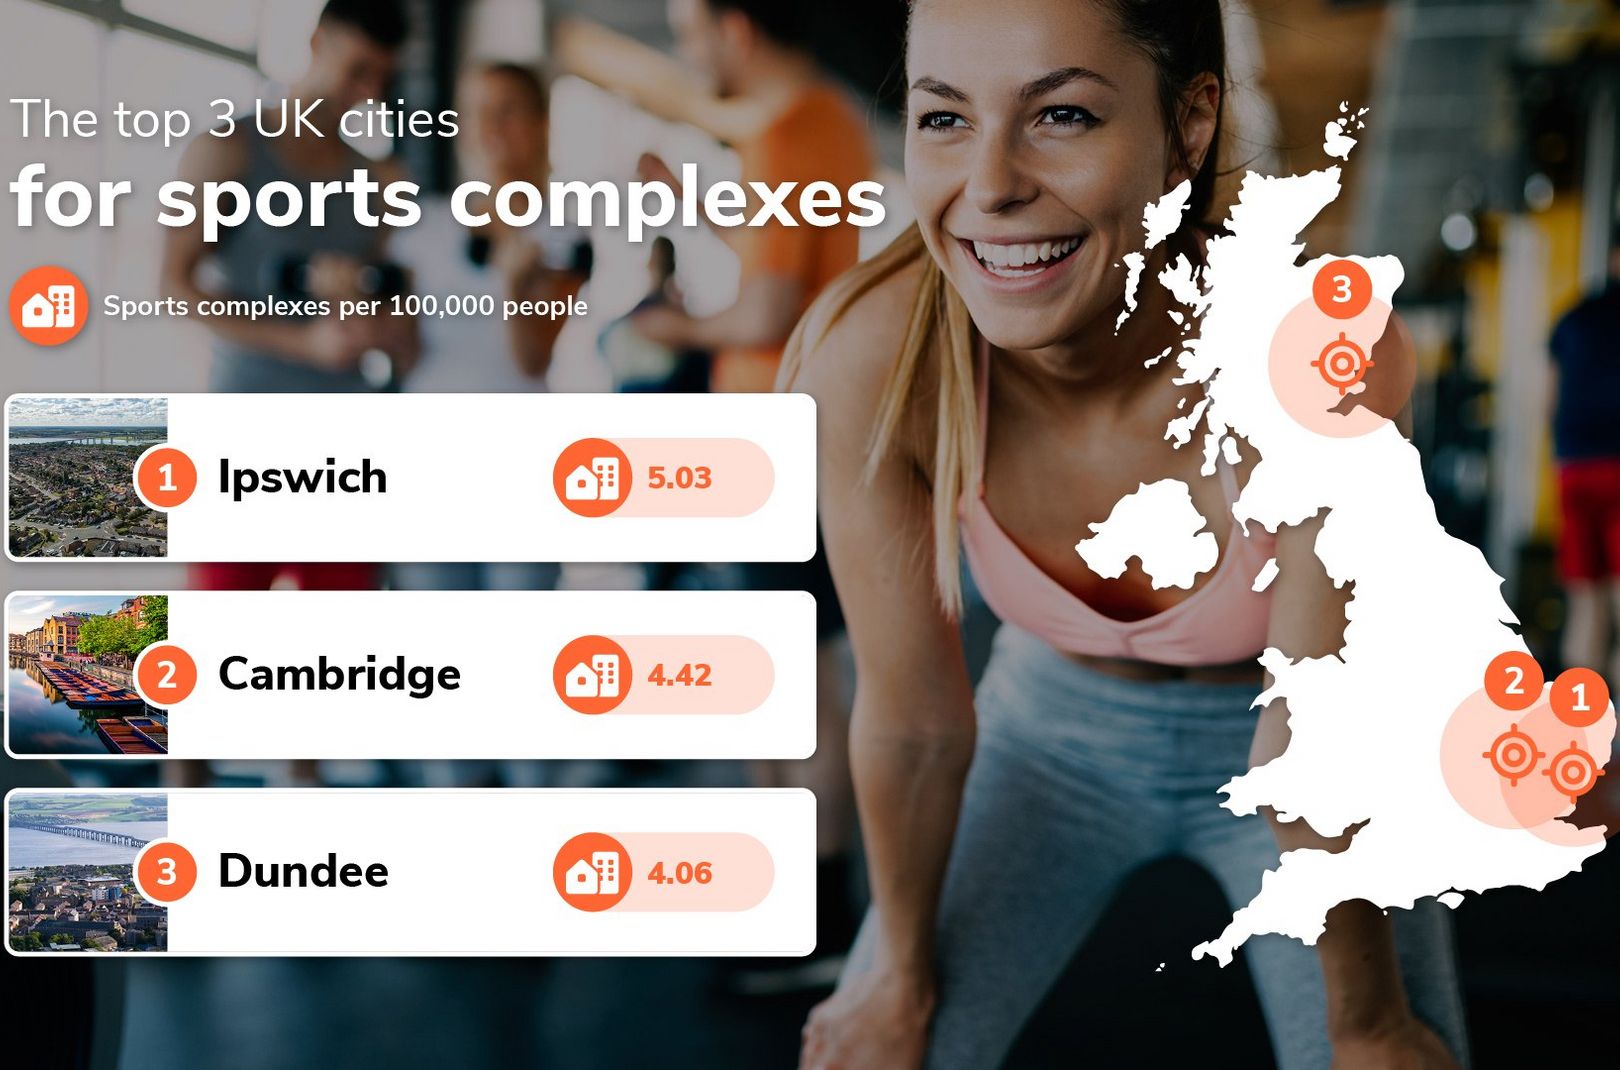 The UK’s top 3 cities for sports complexes